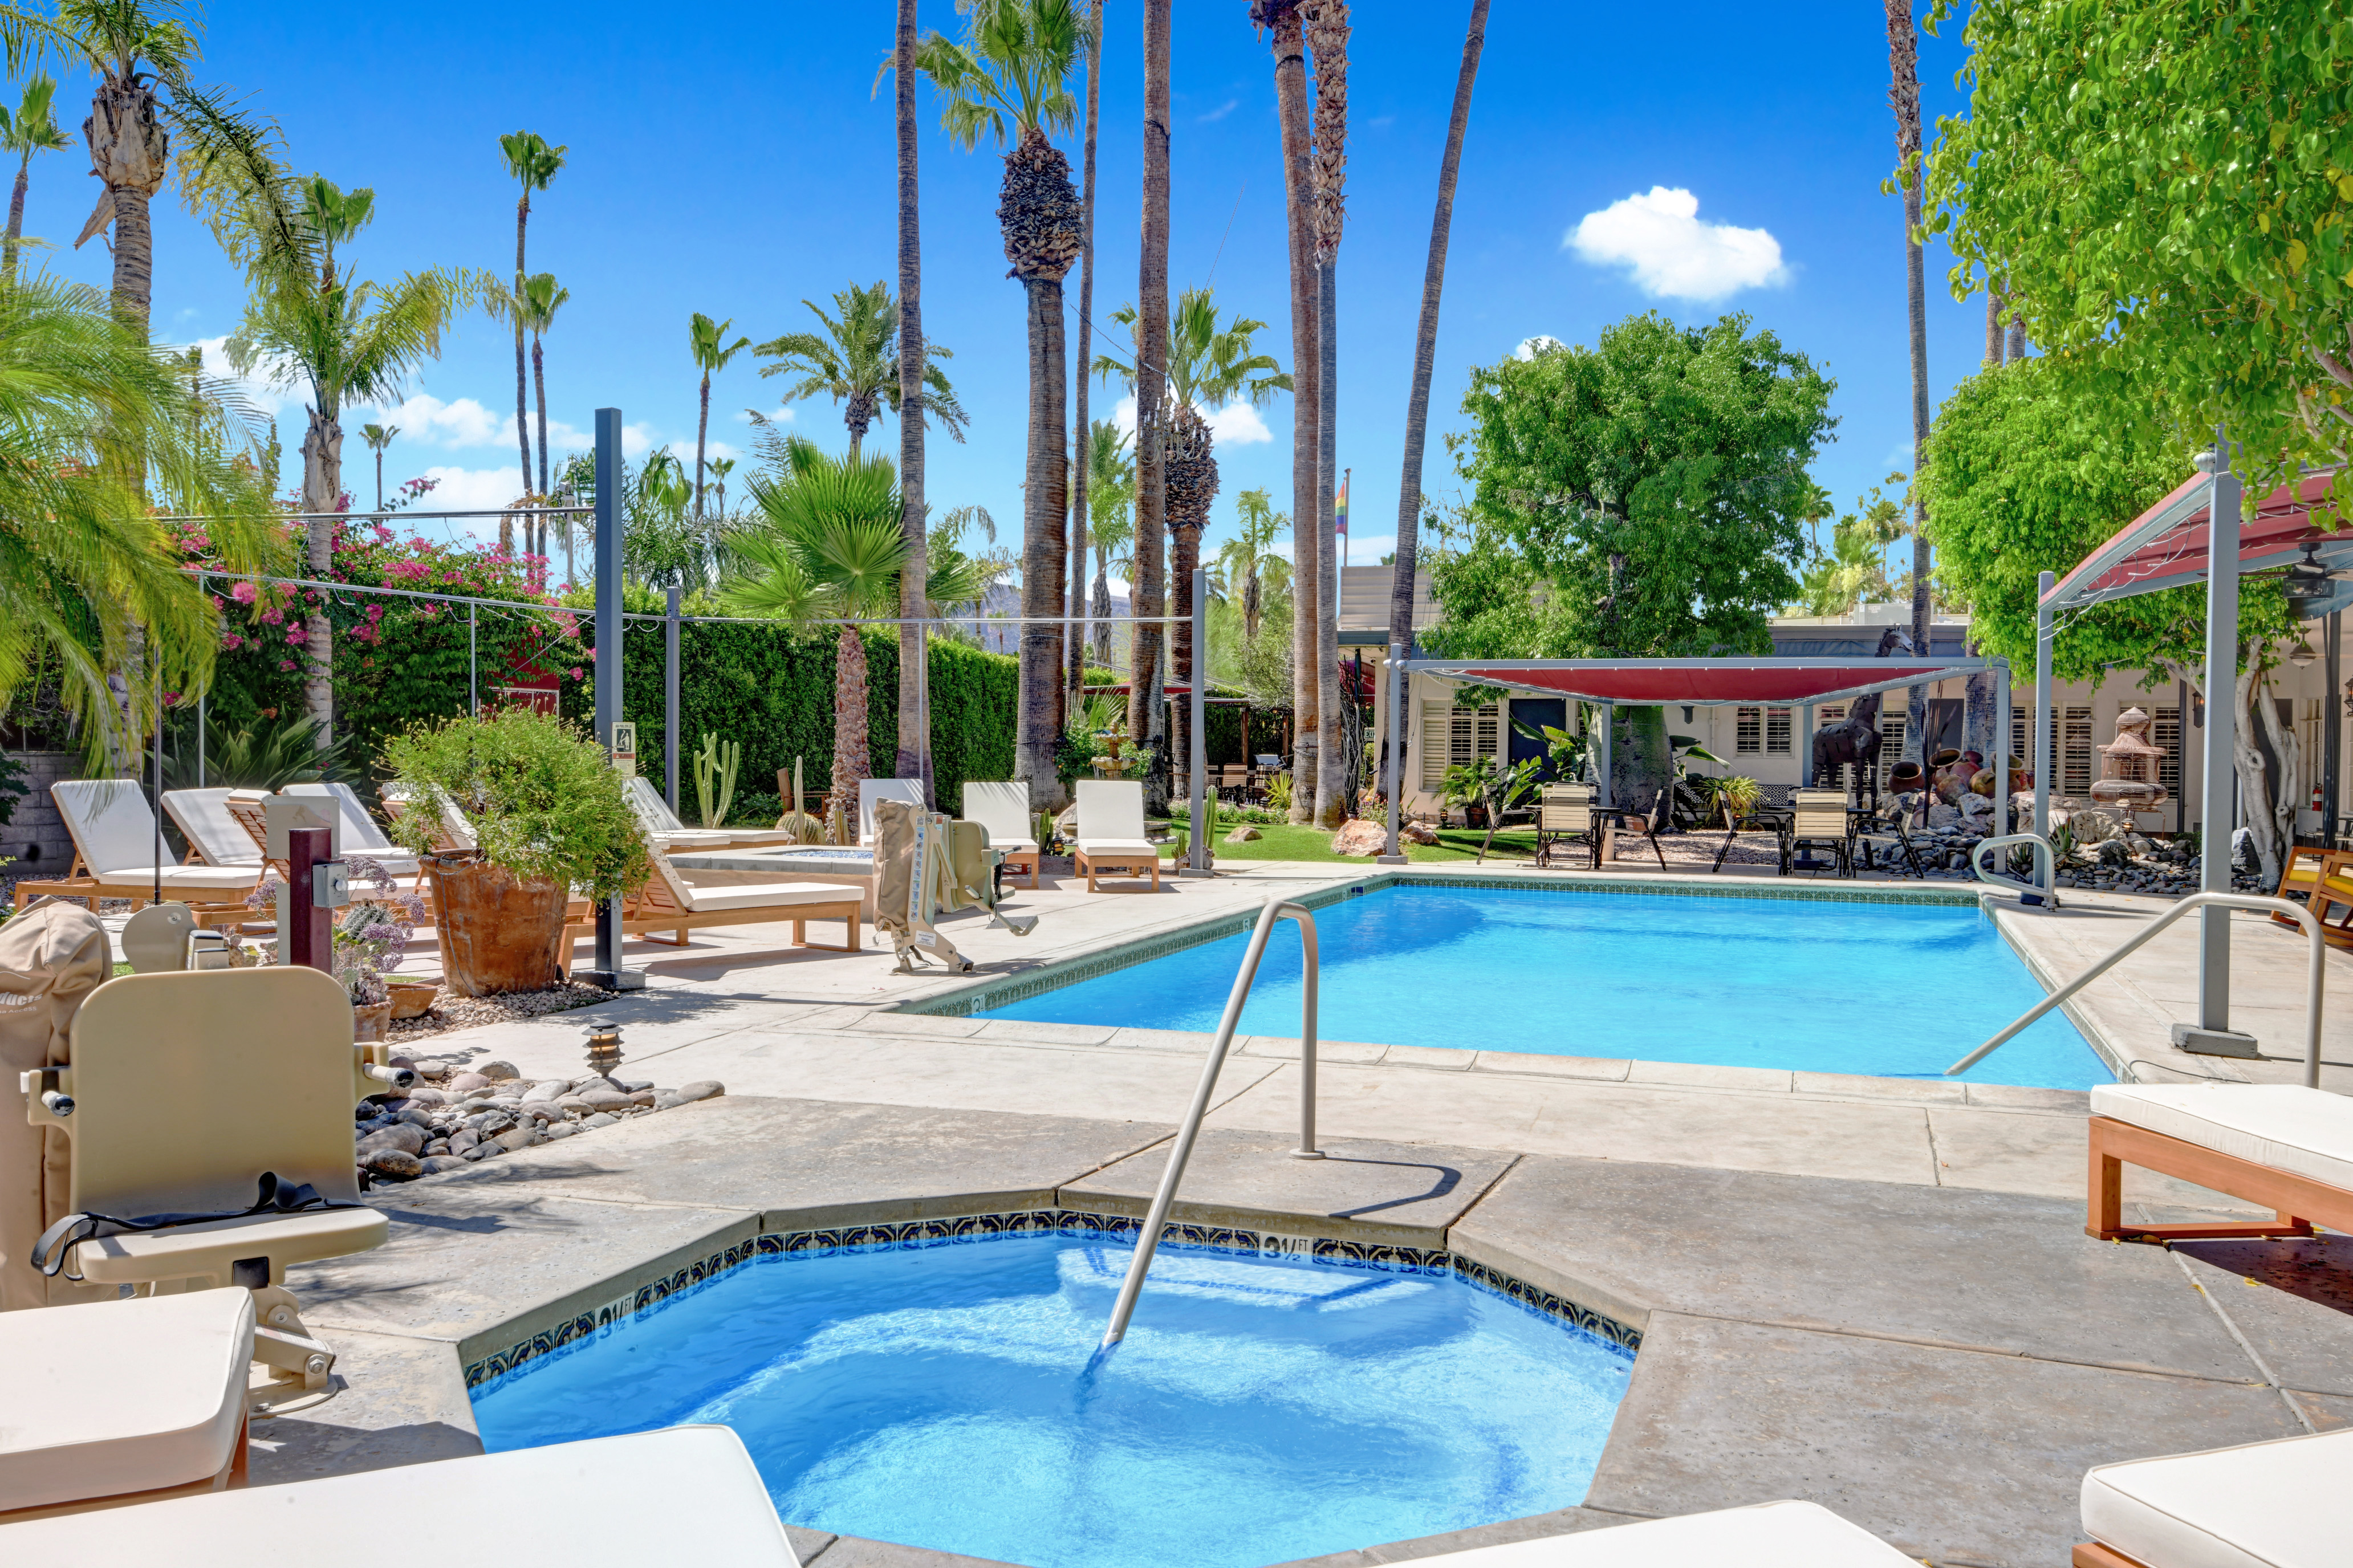 The pool and spa at the clothing-optional Desert Paradise Resort in Palm Springs await gay men who are ready for a change of scenery this summer.